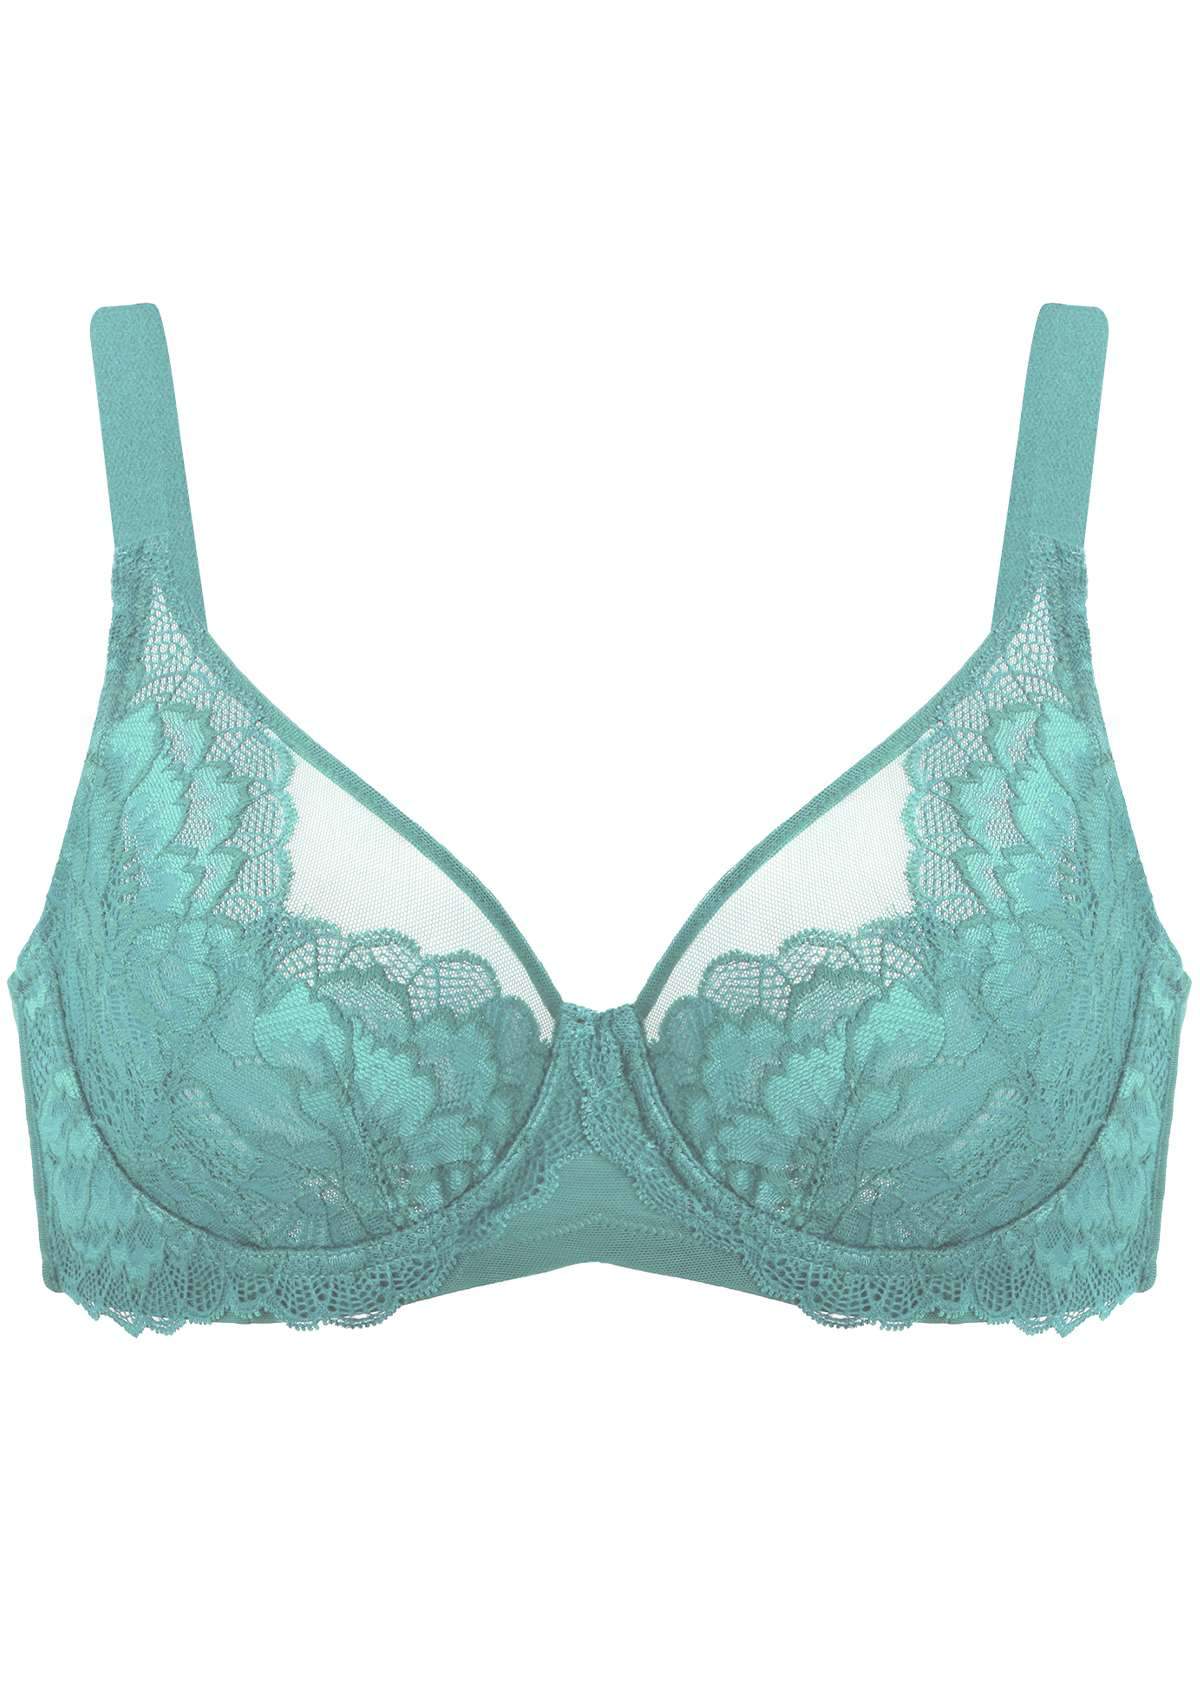 HSIA Paeonia Lace Full Coverage Underwire Non-Padded Uplifting Bra - Light Coral / 36 / D